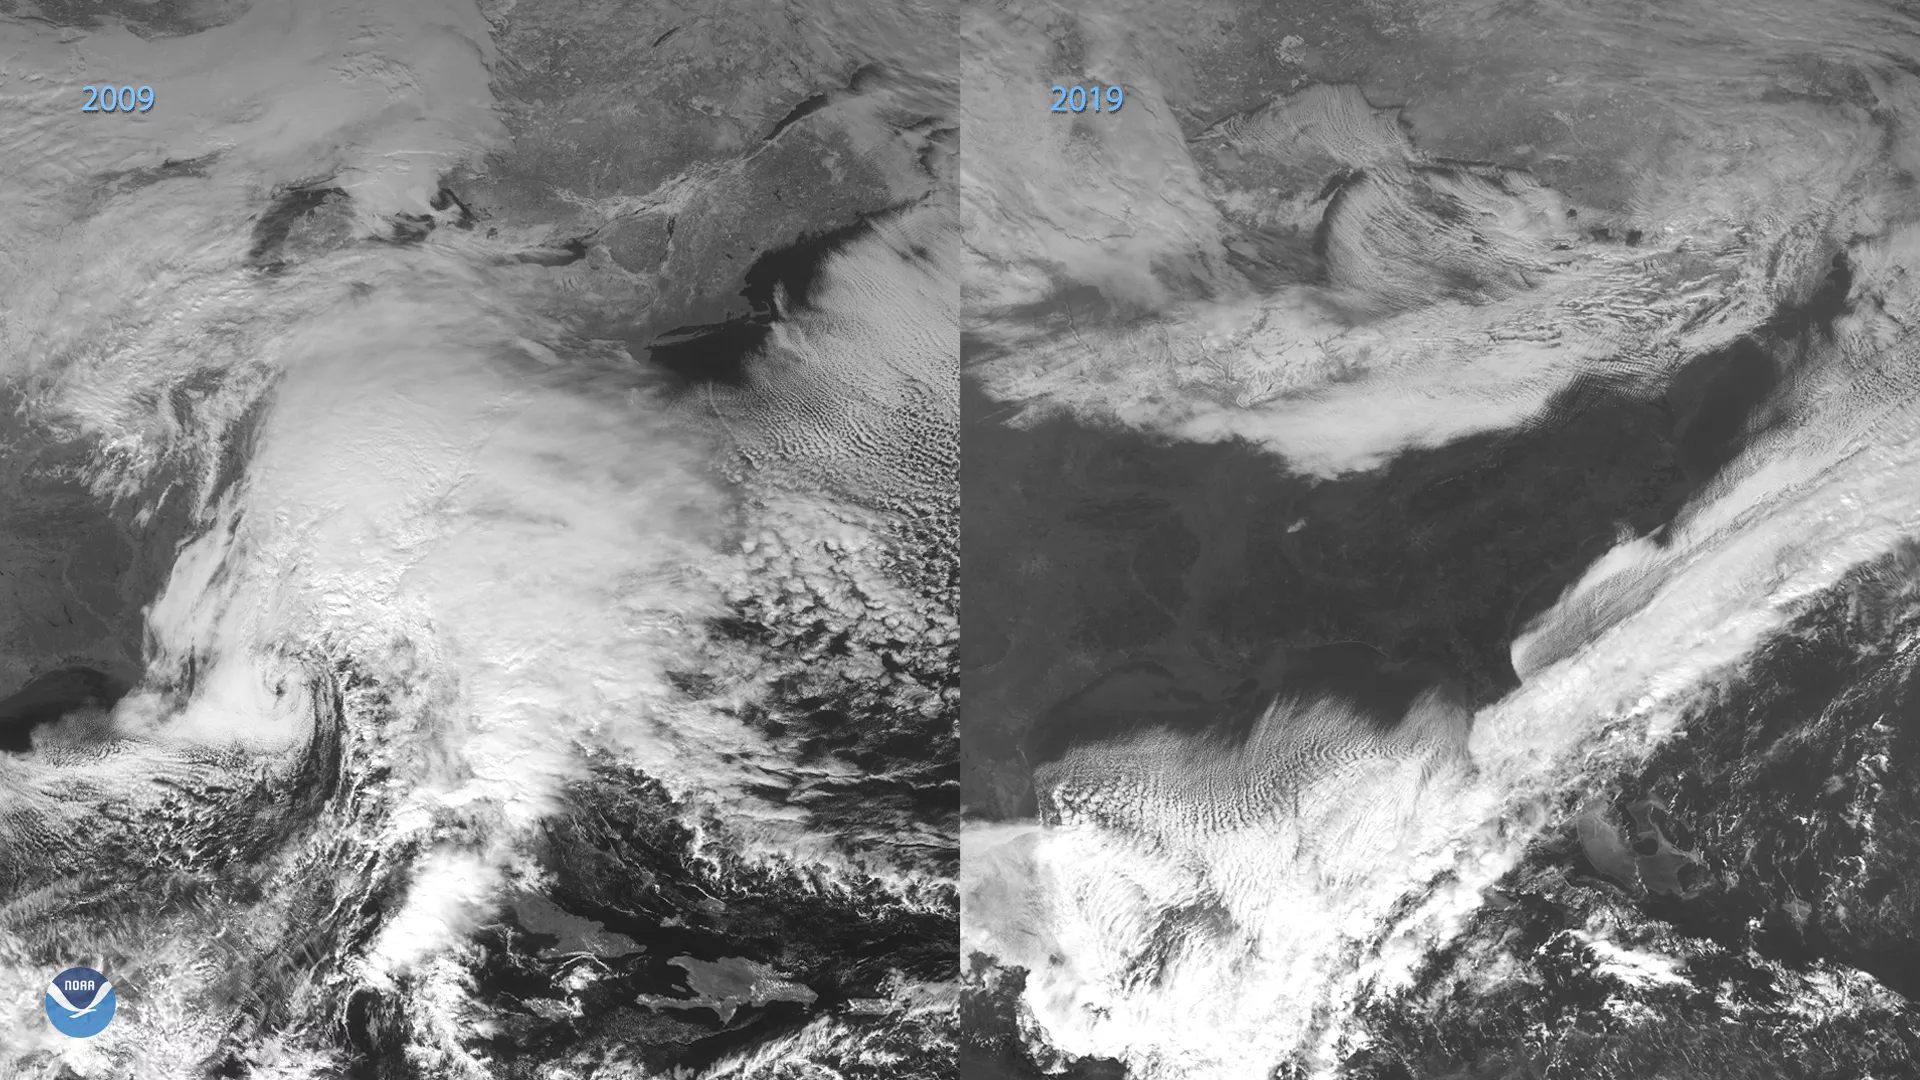 The eastern coast of North America on Dec. 18, 2019 vs. Dec.2009. The GOES-16 satellite showed a long cold front that stretched from Newfoundland to the lower southeastern U.S, contrasting 2009's GOES-12 and 2019's GOES-16. 